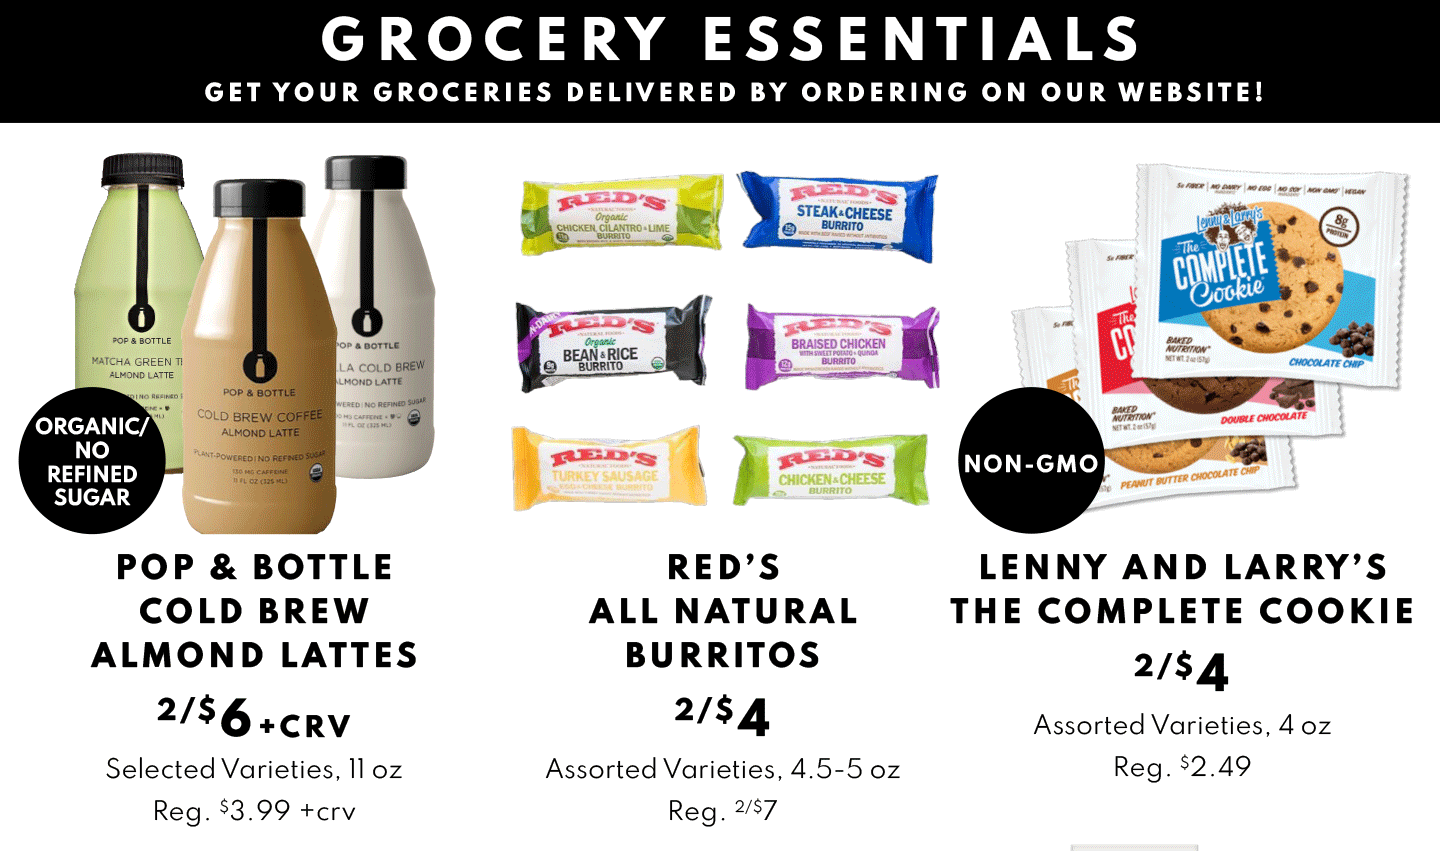 Pop & Bottle Cold Brew Almond Lattes 2/$6, Red's All Natural Burritos 2/$4 and Lenny and Larry's the COmplete Cookie 2/$4